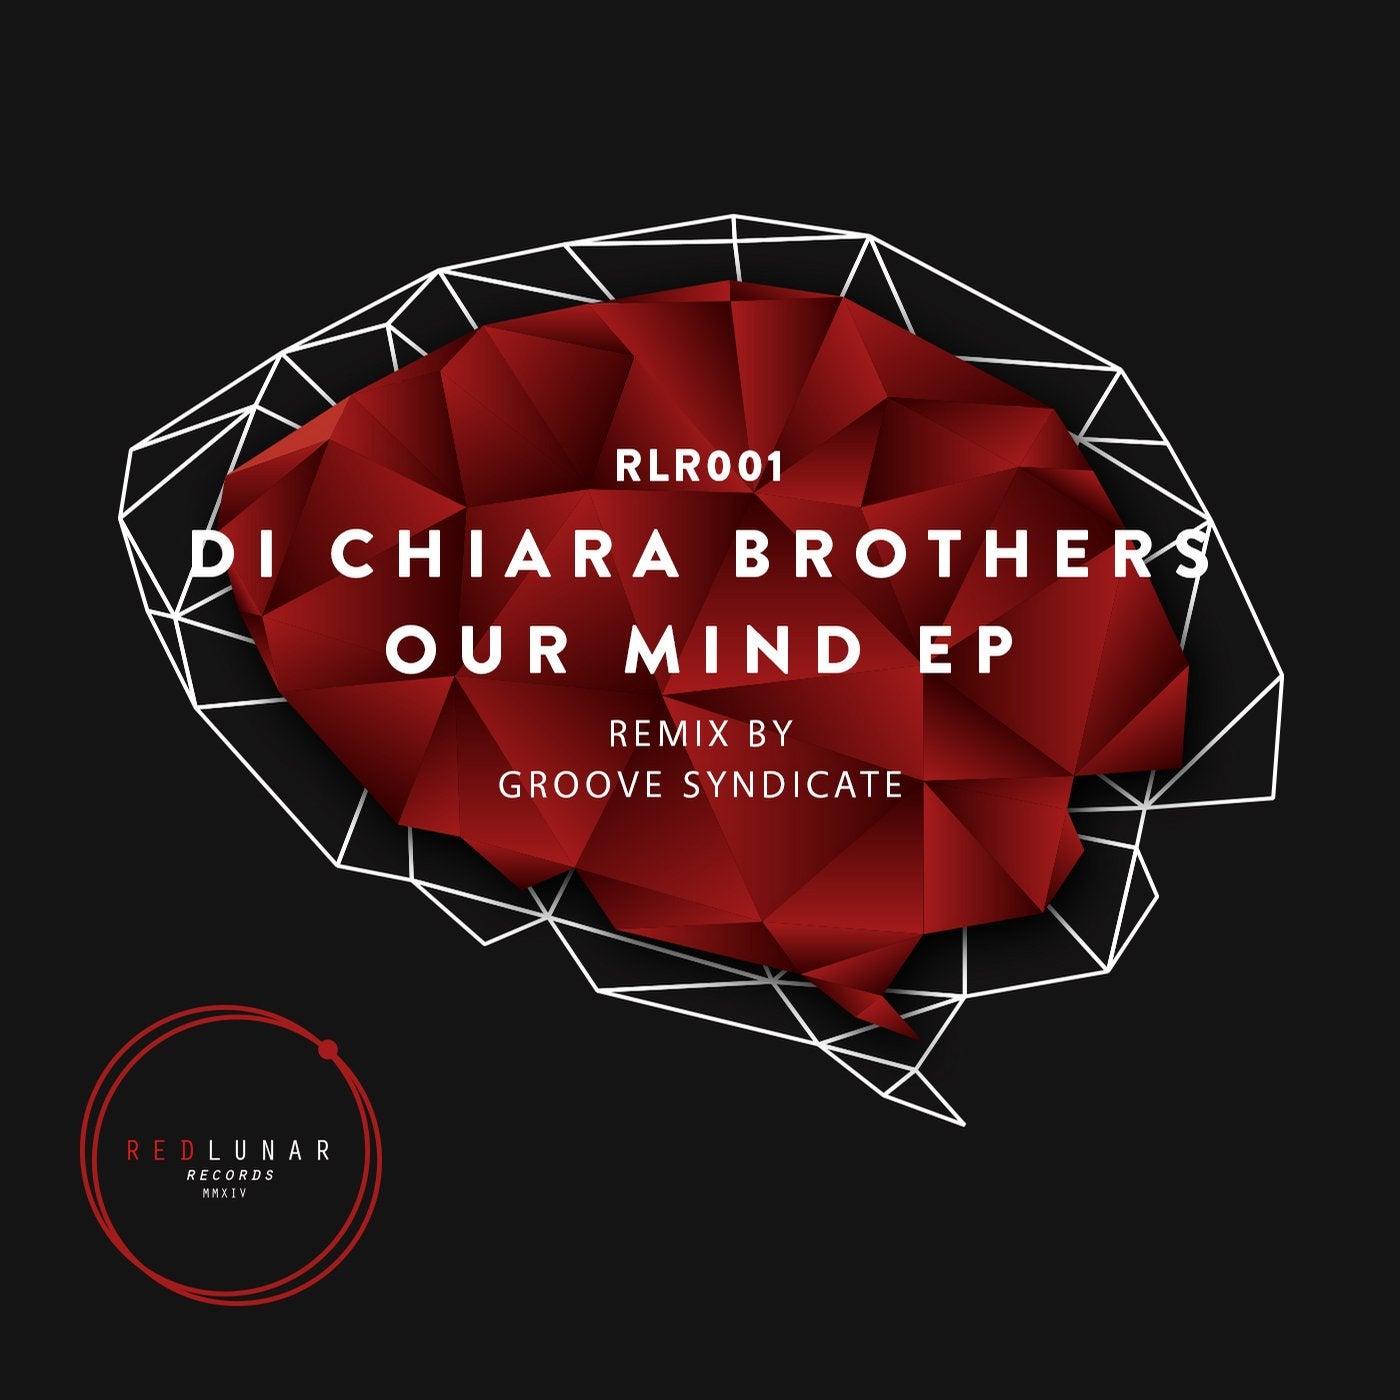 Our Mind EP